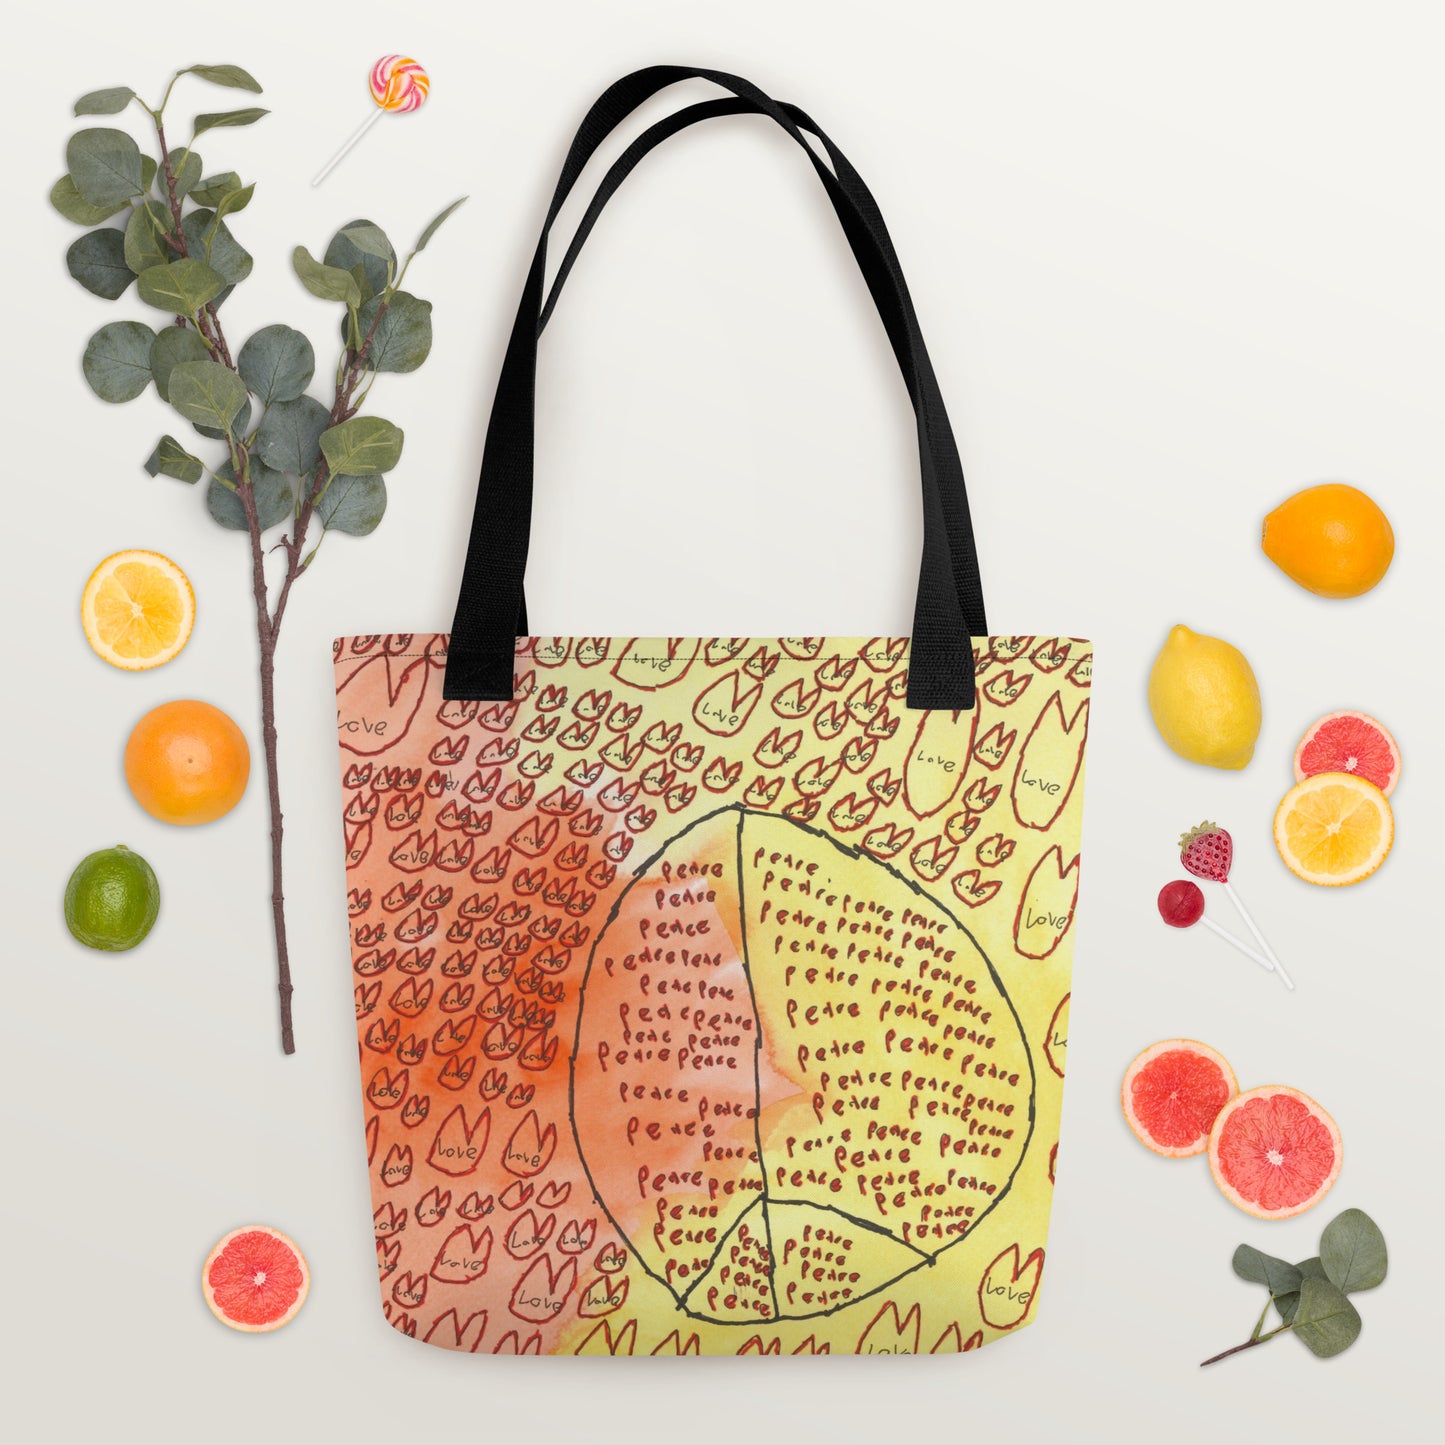 Tote bag - "Peace and Love"